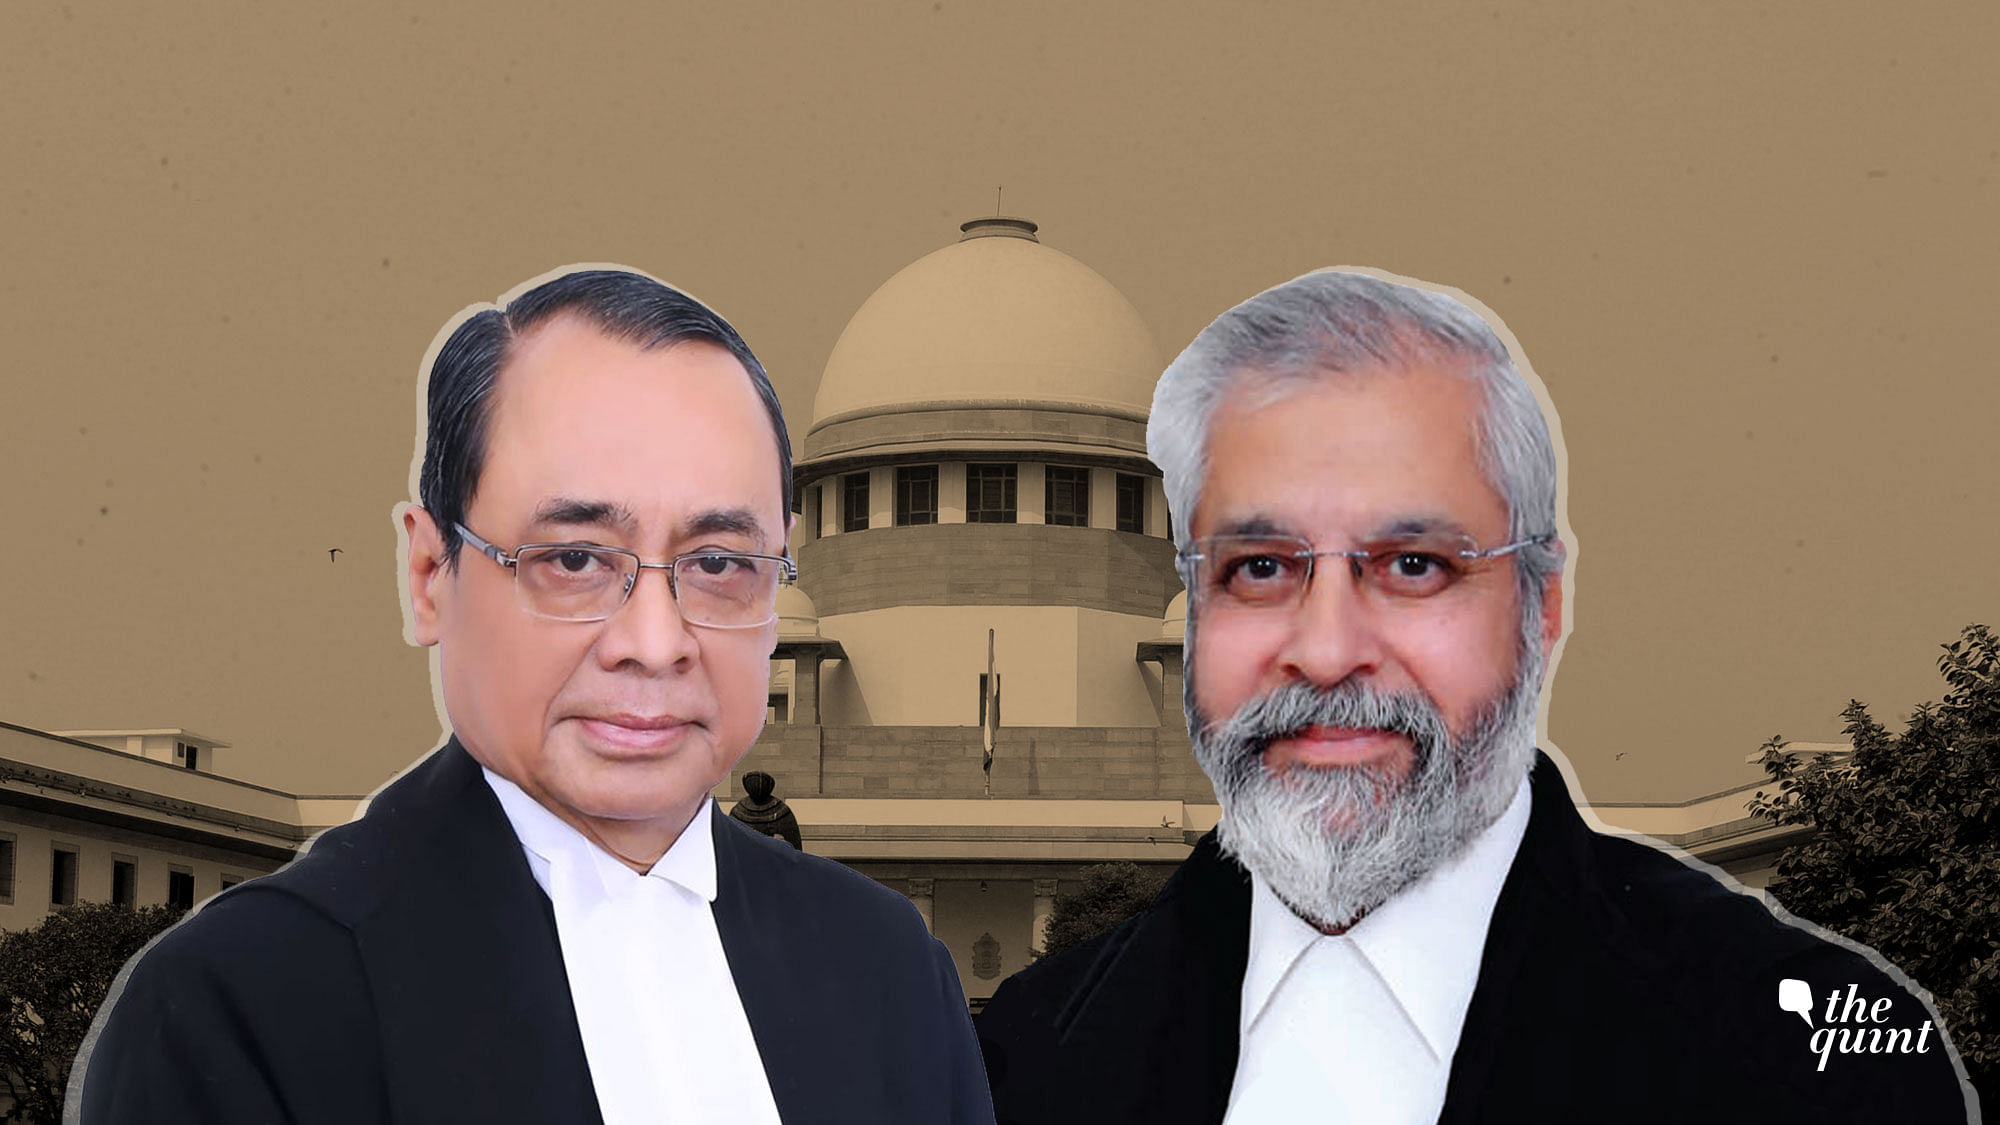 Justice Ranjan Gogoi (left) and Justice Madan Lokur (right) of the Supreme Court of India.